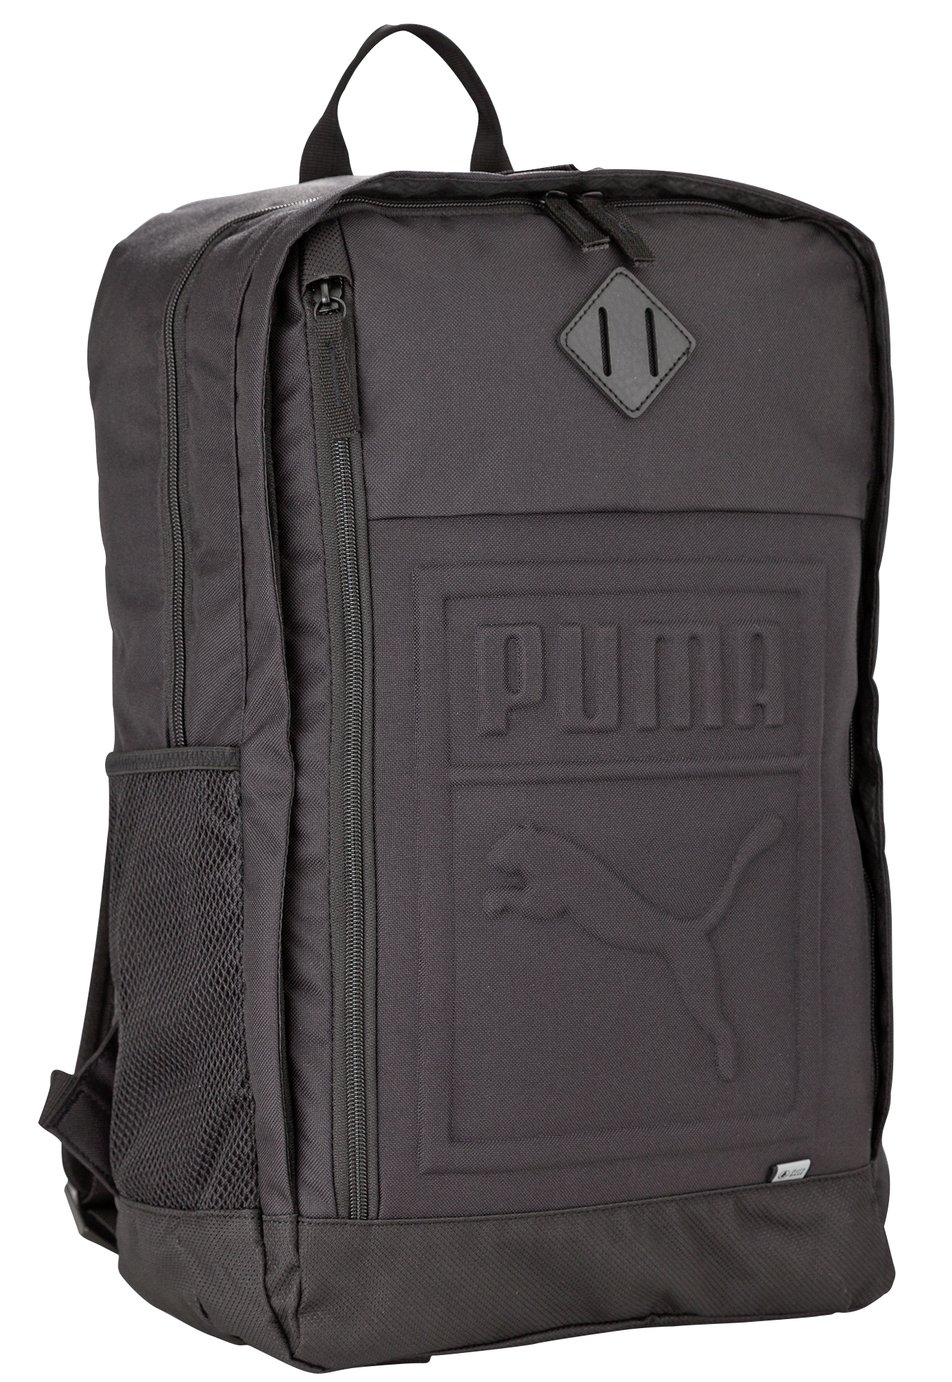 Puma Embossed 27L Backpack Review